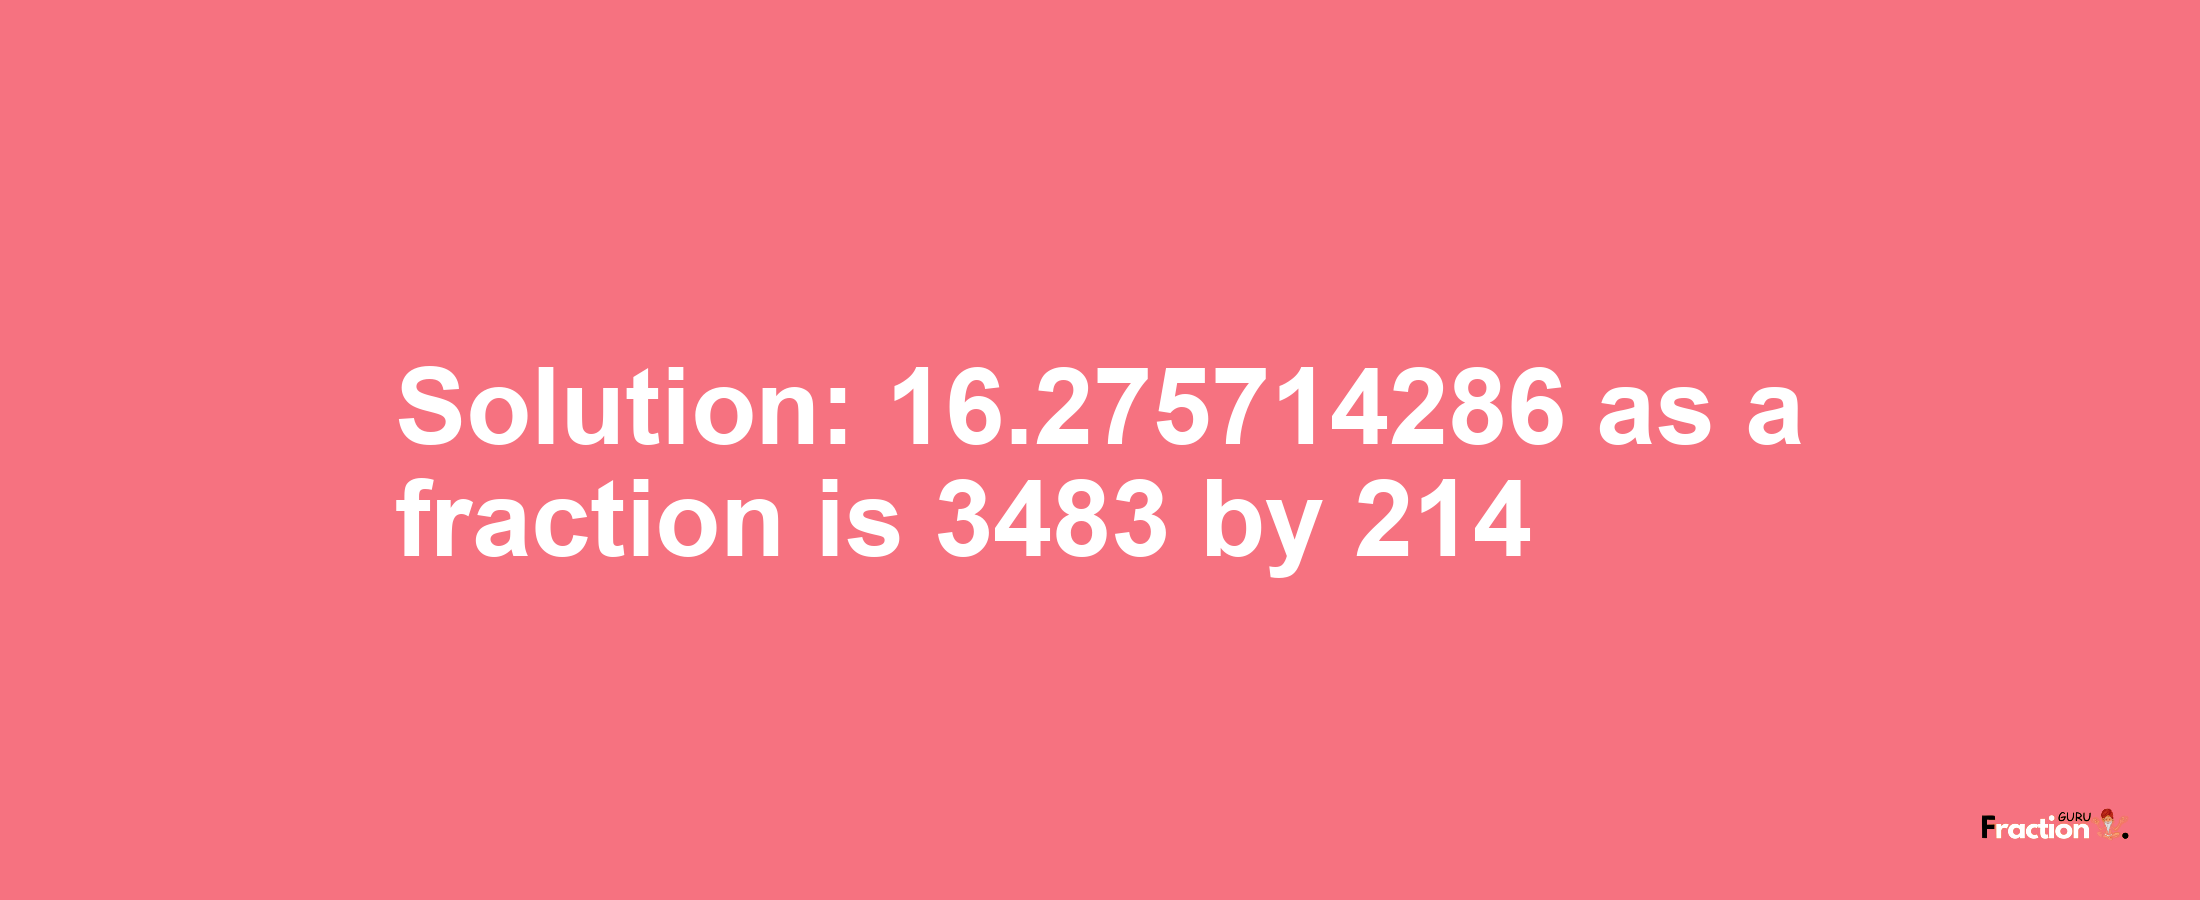 Solution:16.275714286 as a fraction is 3483/214